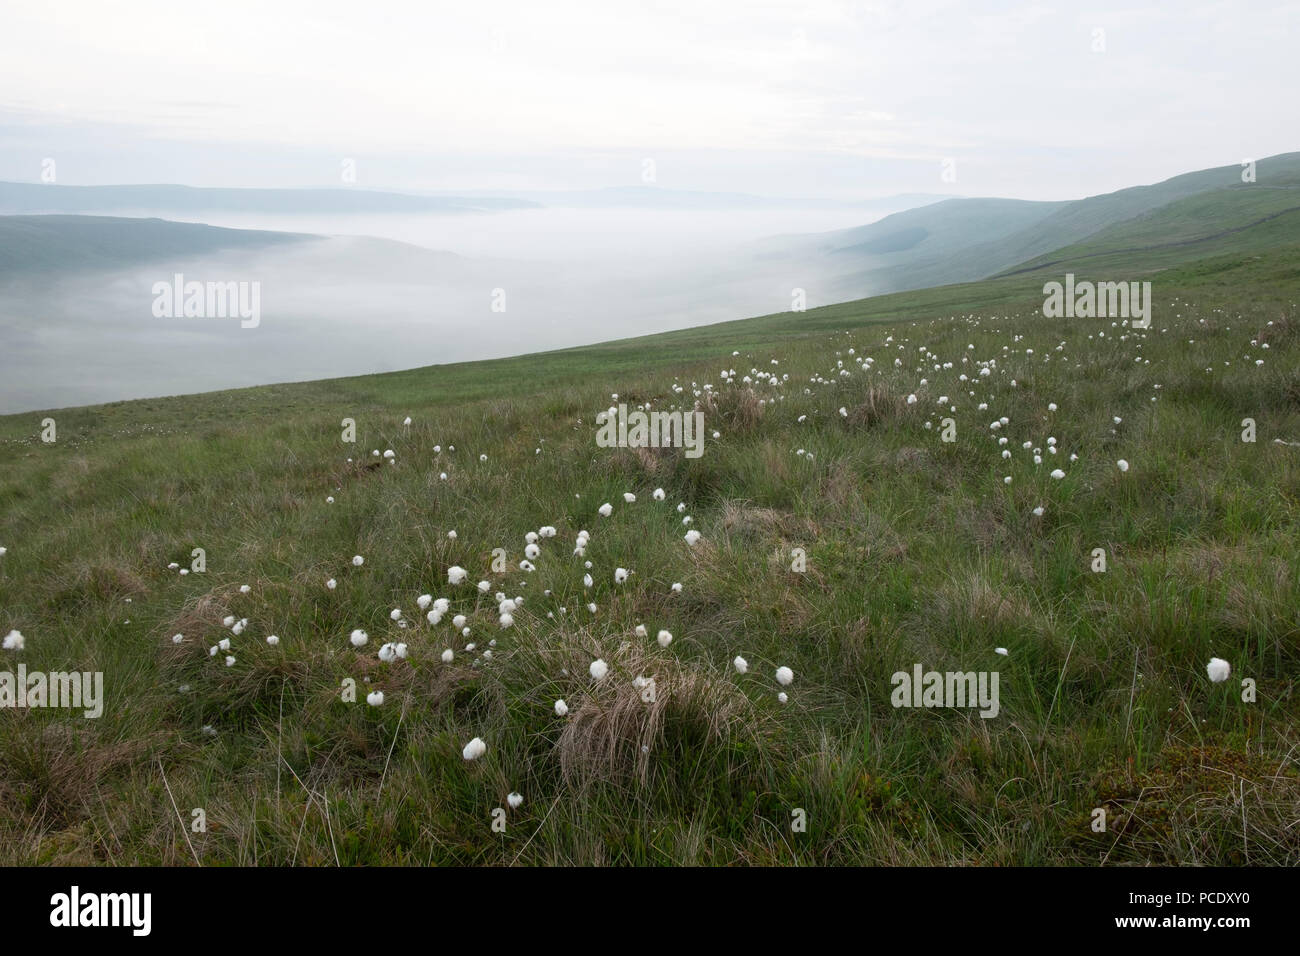 A Late spring morning near in the Yorkshire Dales. Cotton grass grows high on the hill side as inverted cloud has settled in the valley below. Stock Photo